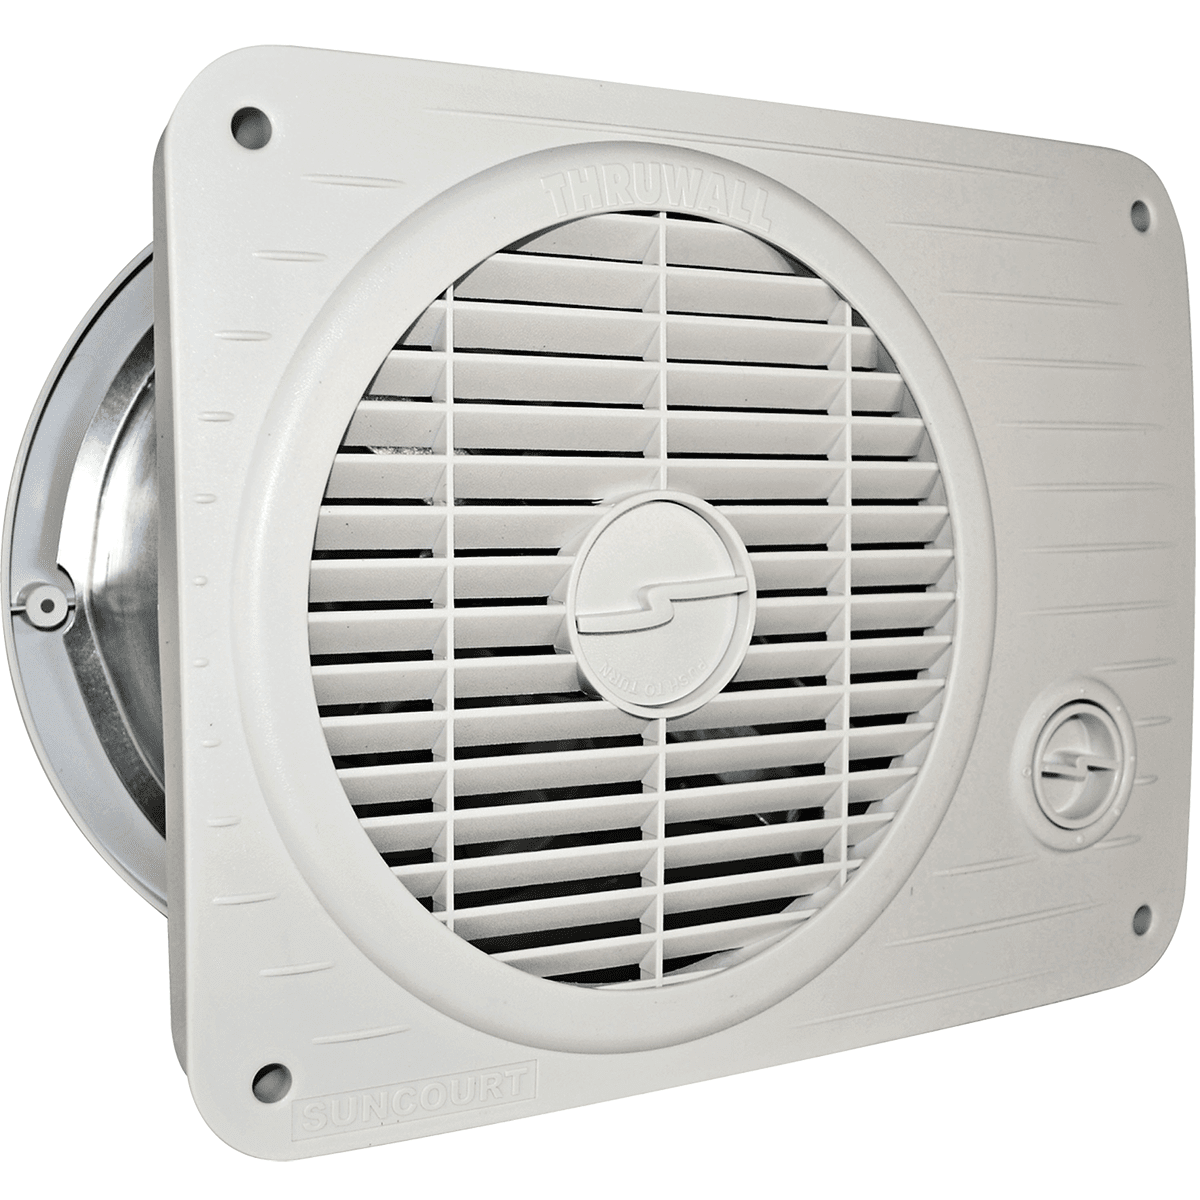 Suncourt ThruWall Variable Speed Room to Room Fan